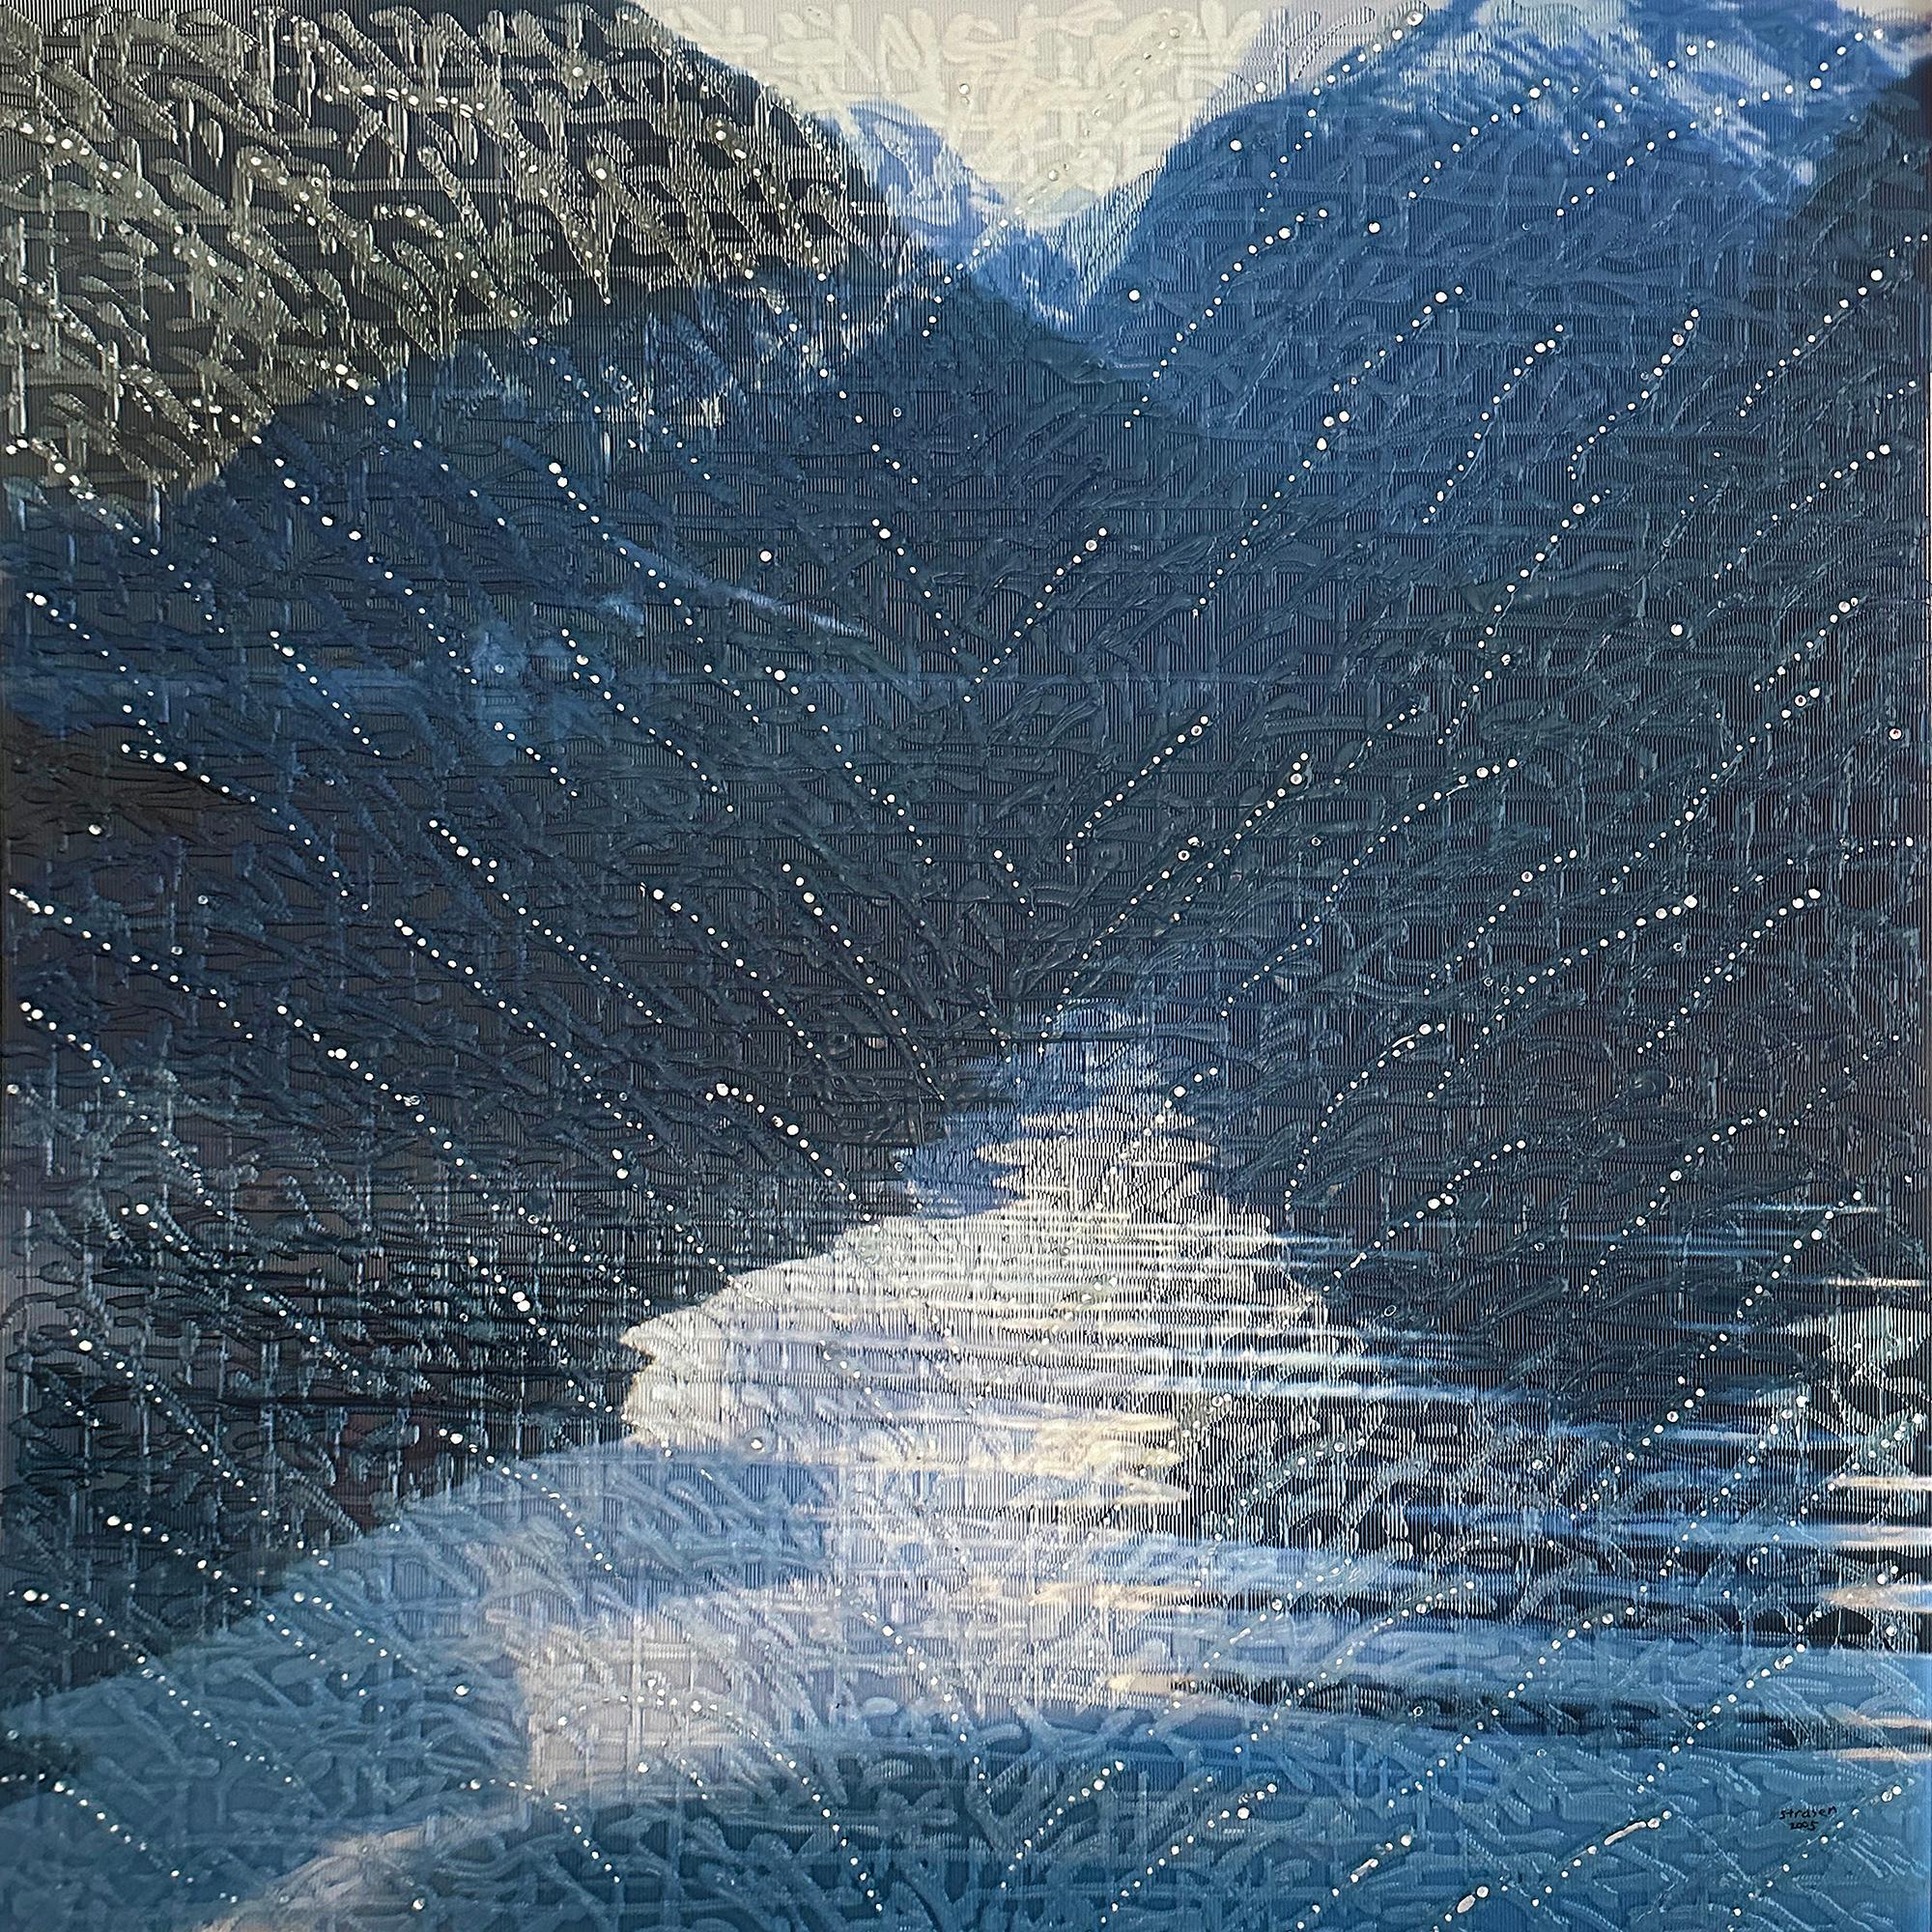 SPLASH MOUNTAINS, Lenticular, patterned, landscape, mountains, blue, gray - Painting by Barbara Strasen